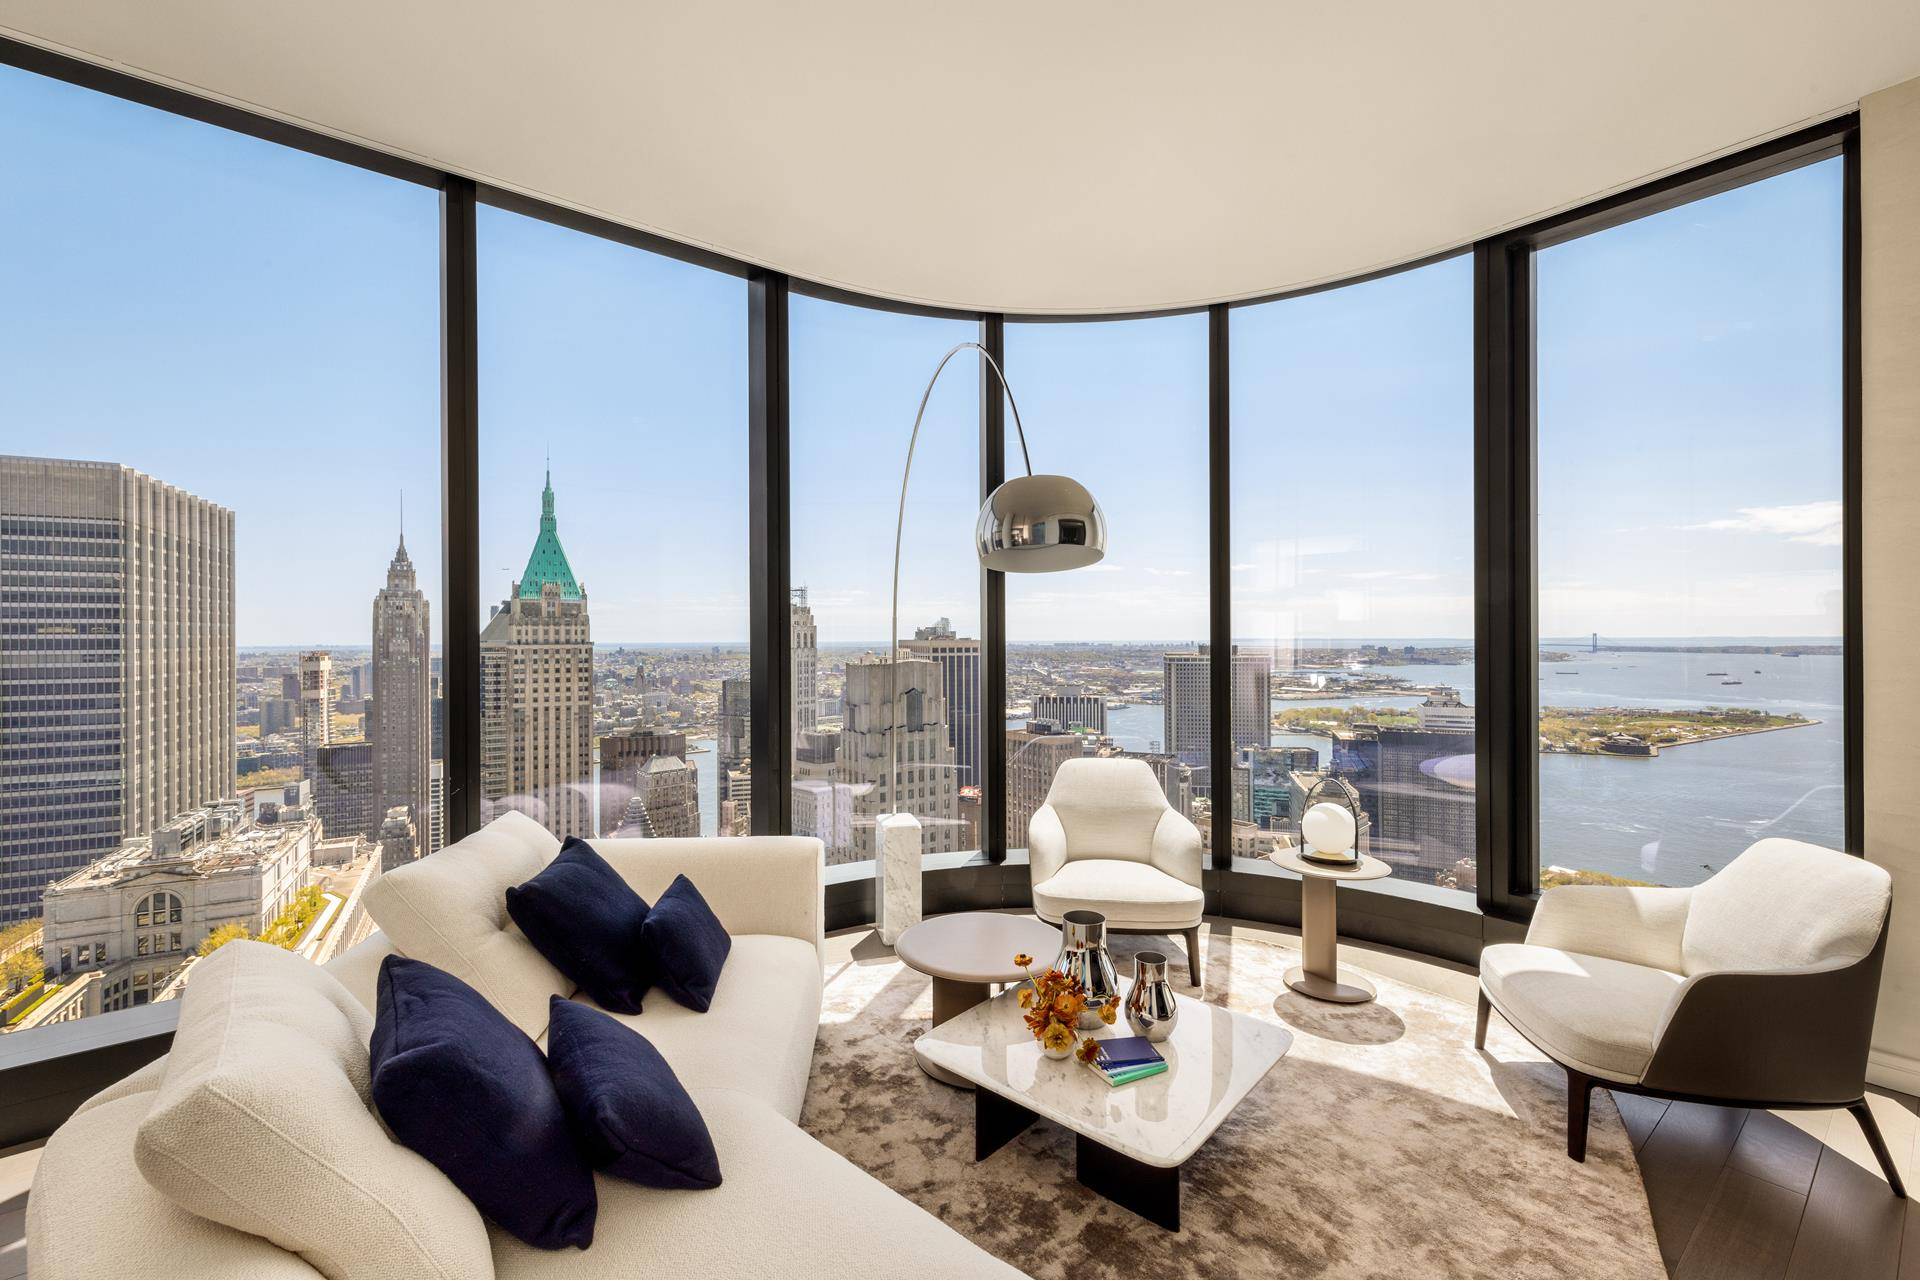 Residence 74B at The Greenwich by Rafael Vi oly is a generously sized one bedroom, one and a half bathroom home showcasing southern and eastern exposures, revealing panoramic vistas of ...